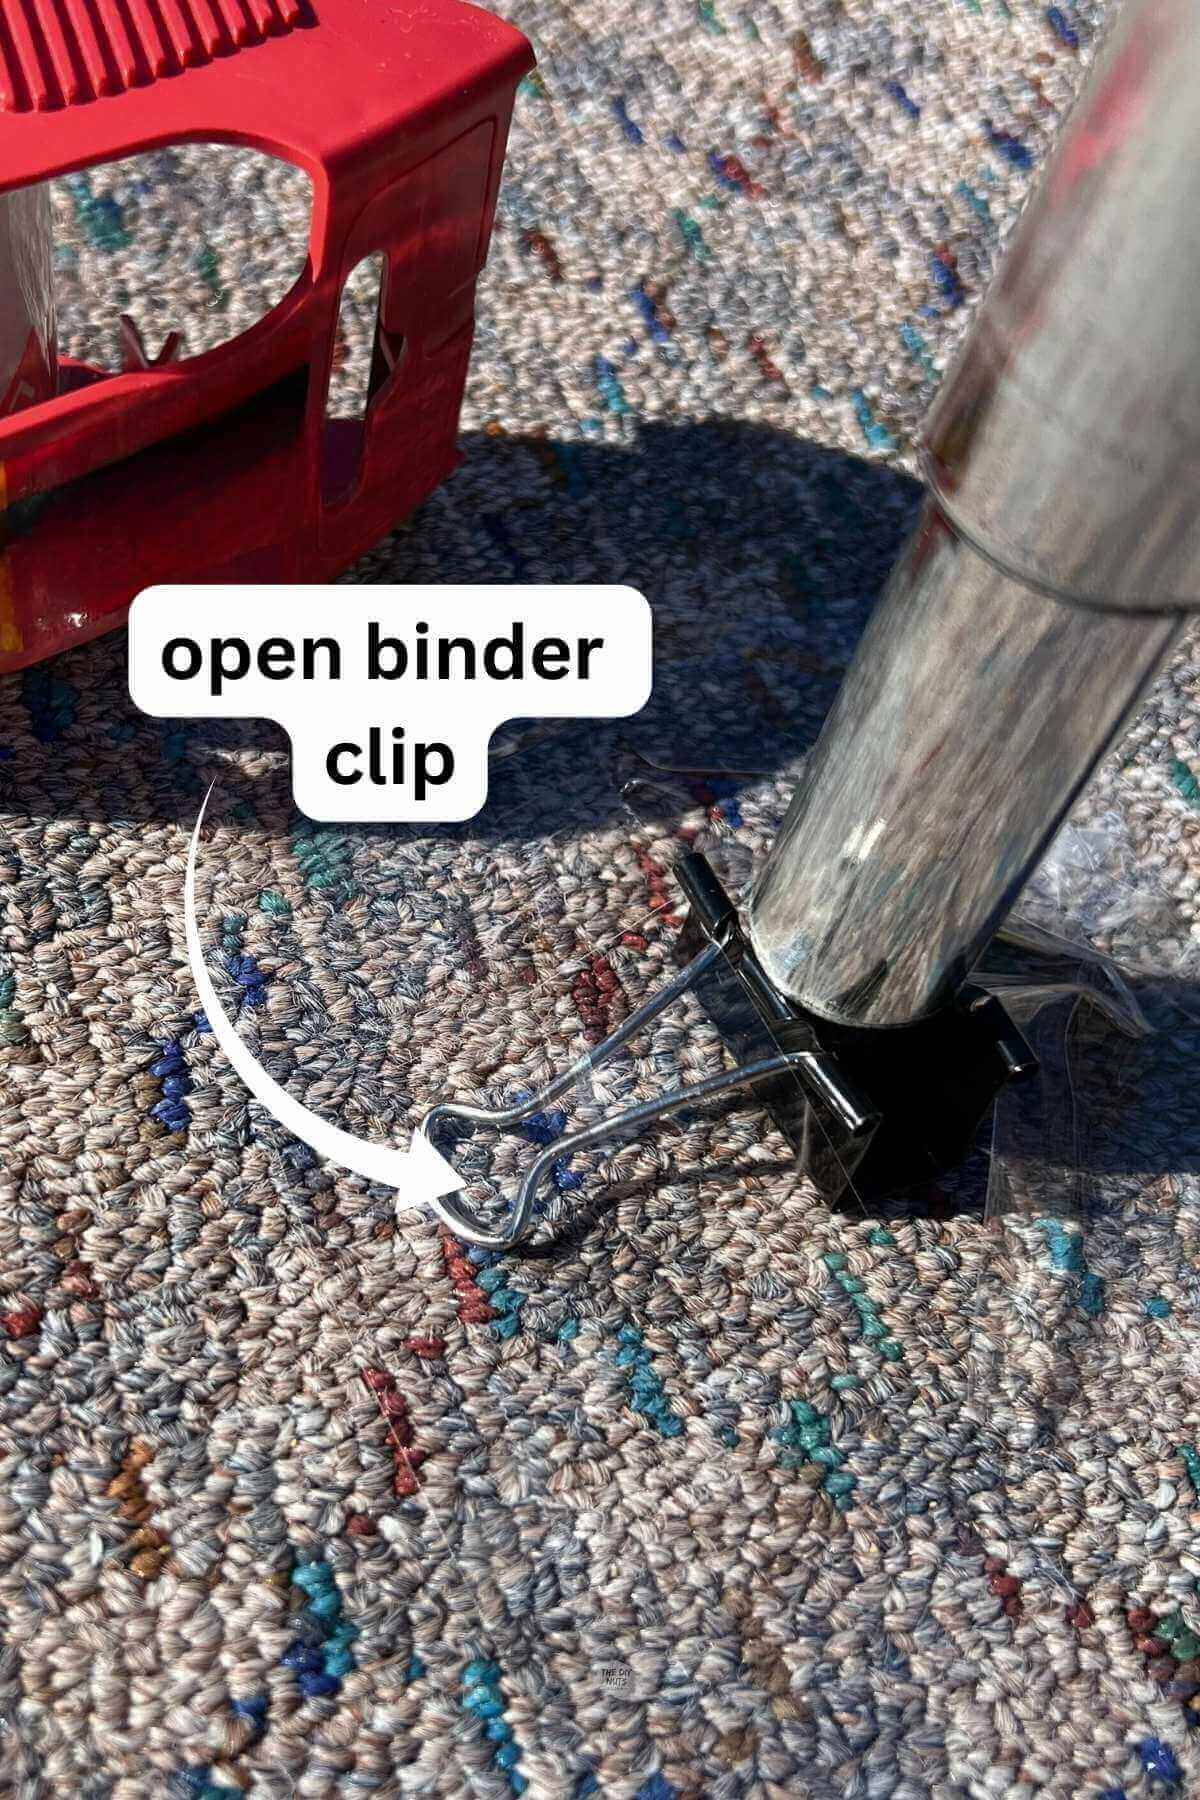 binder clip open and tape to carpet with silver toilet paper roll being held by binder clip.